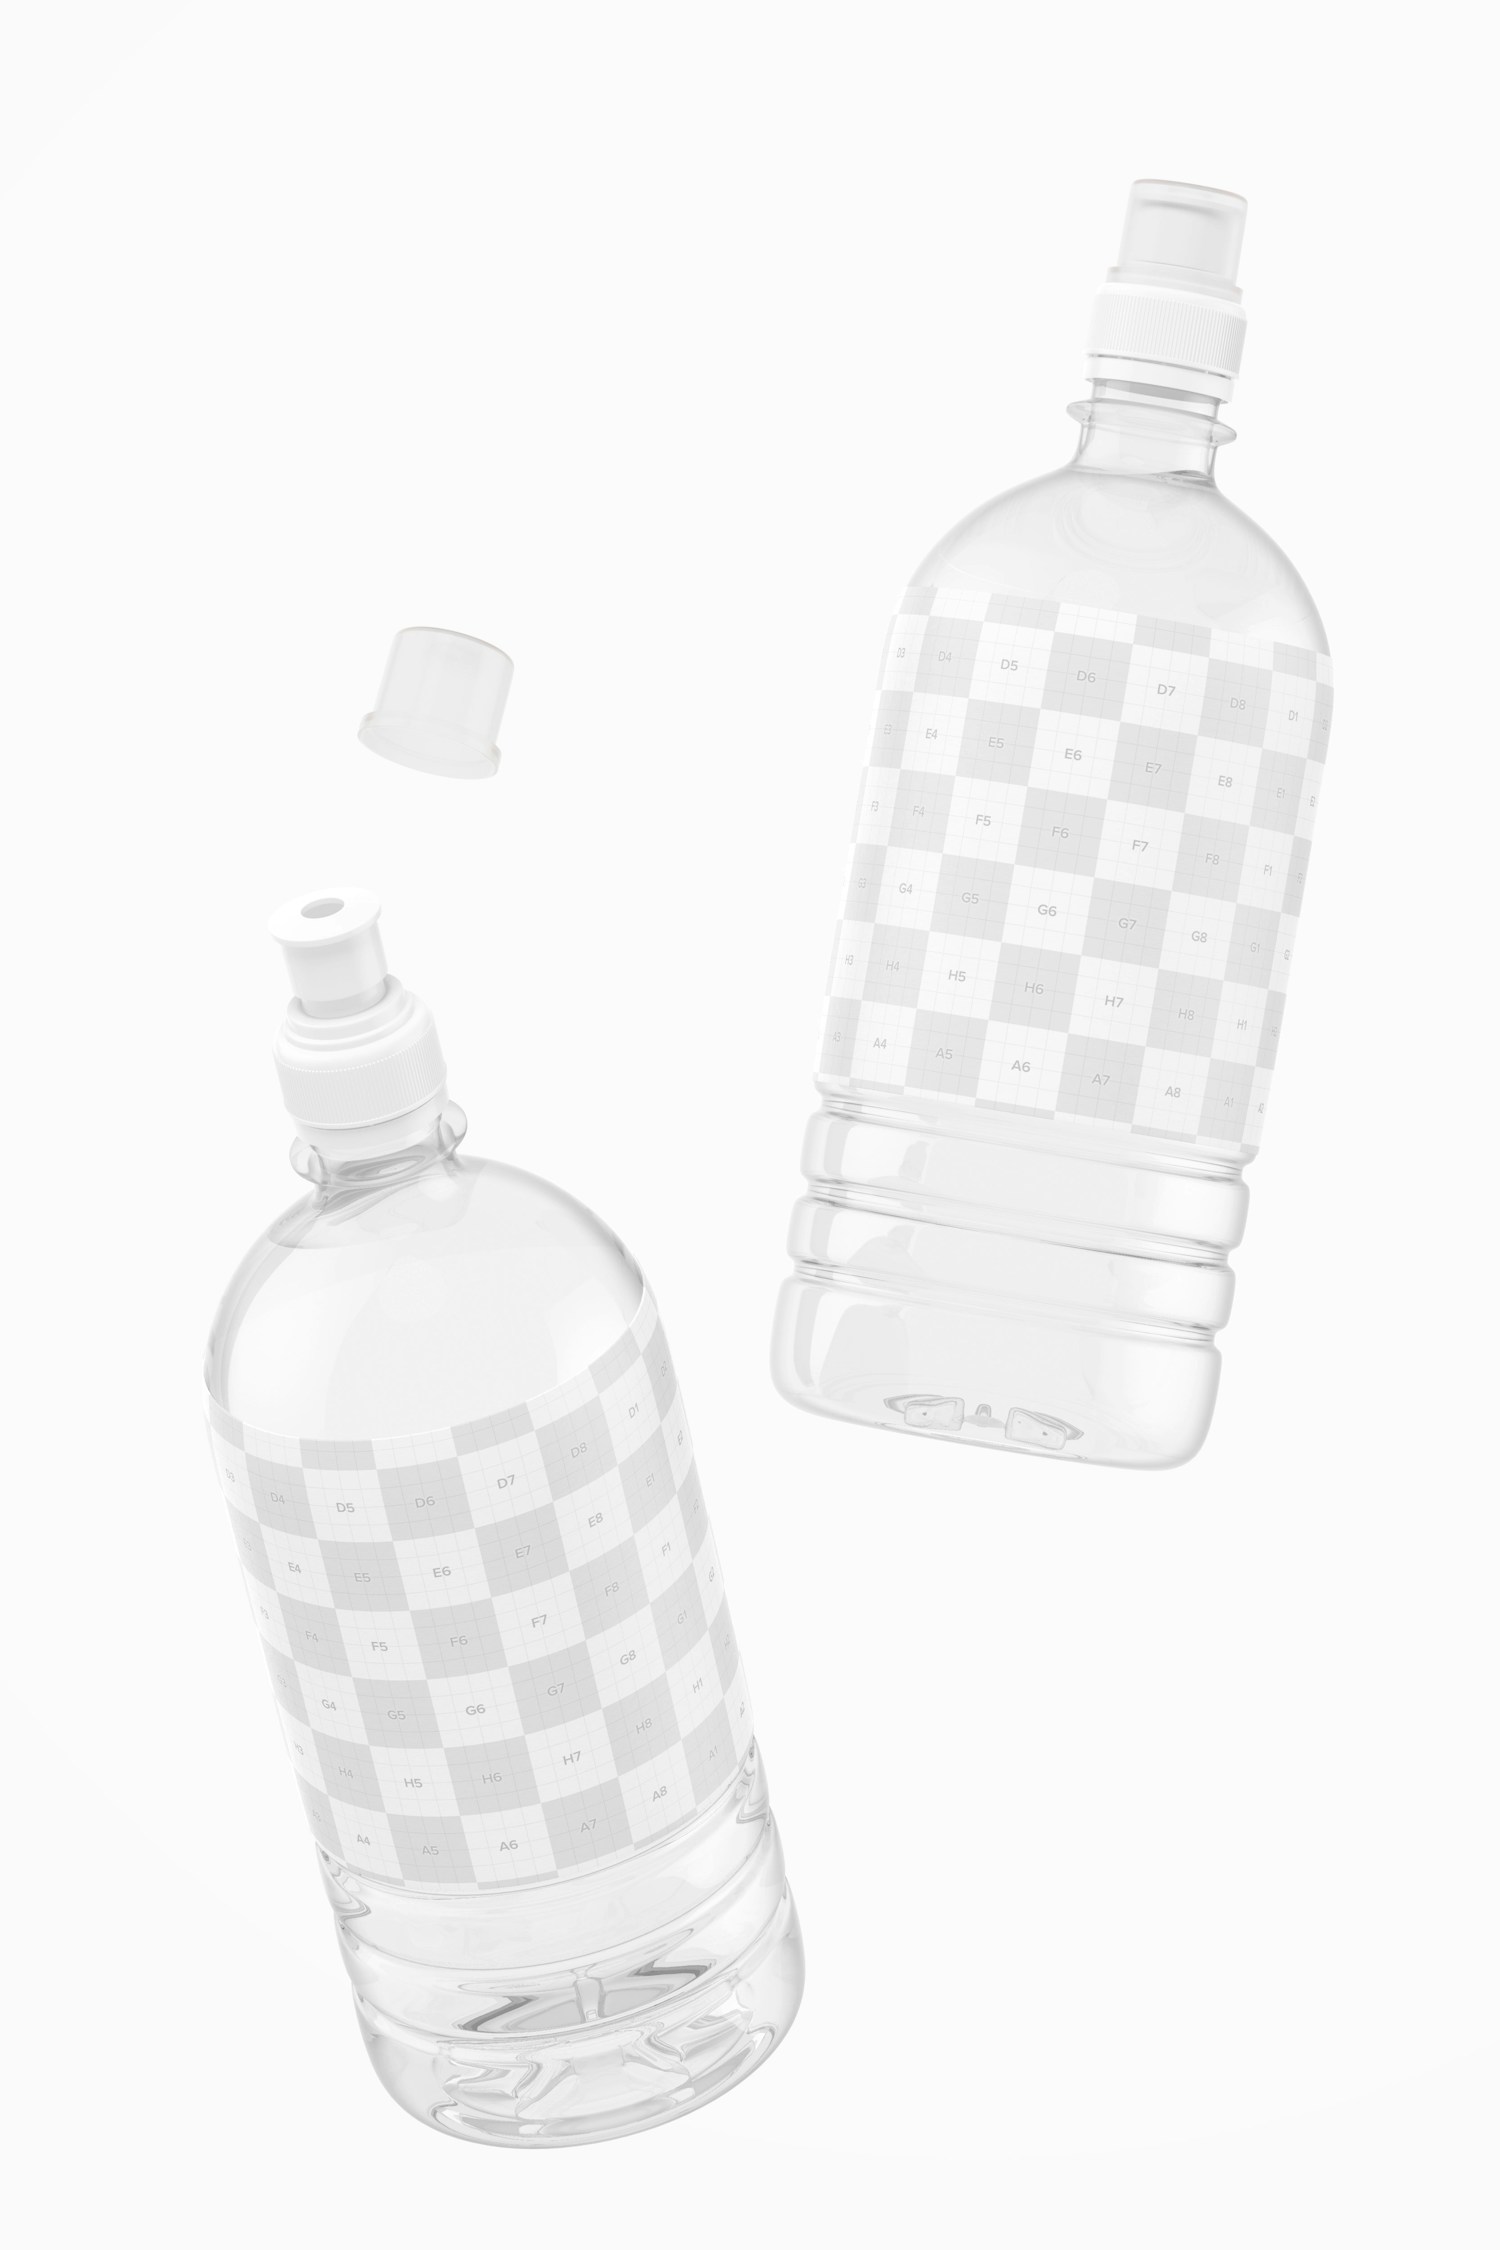 Water Bottles with Sport Cap Mockup, Floating